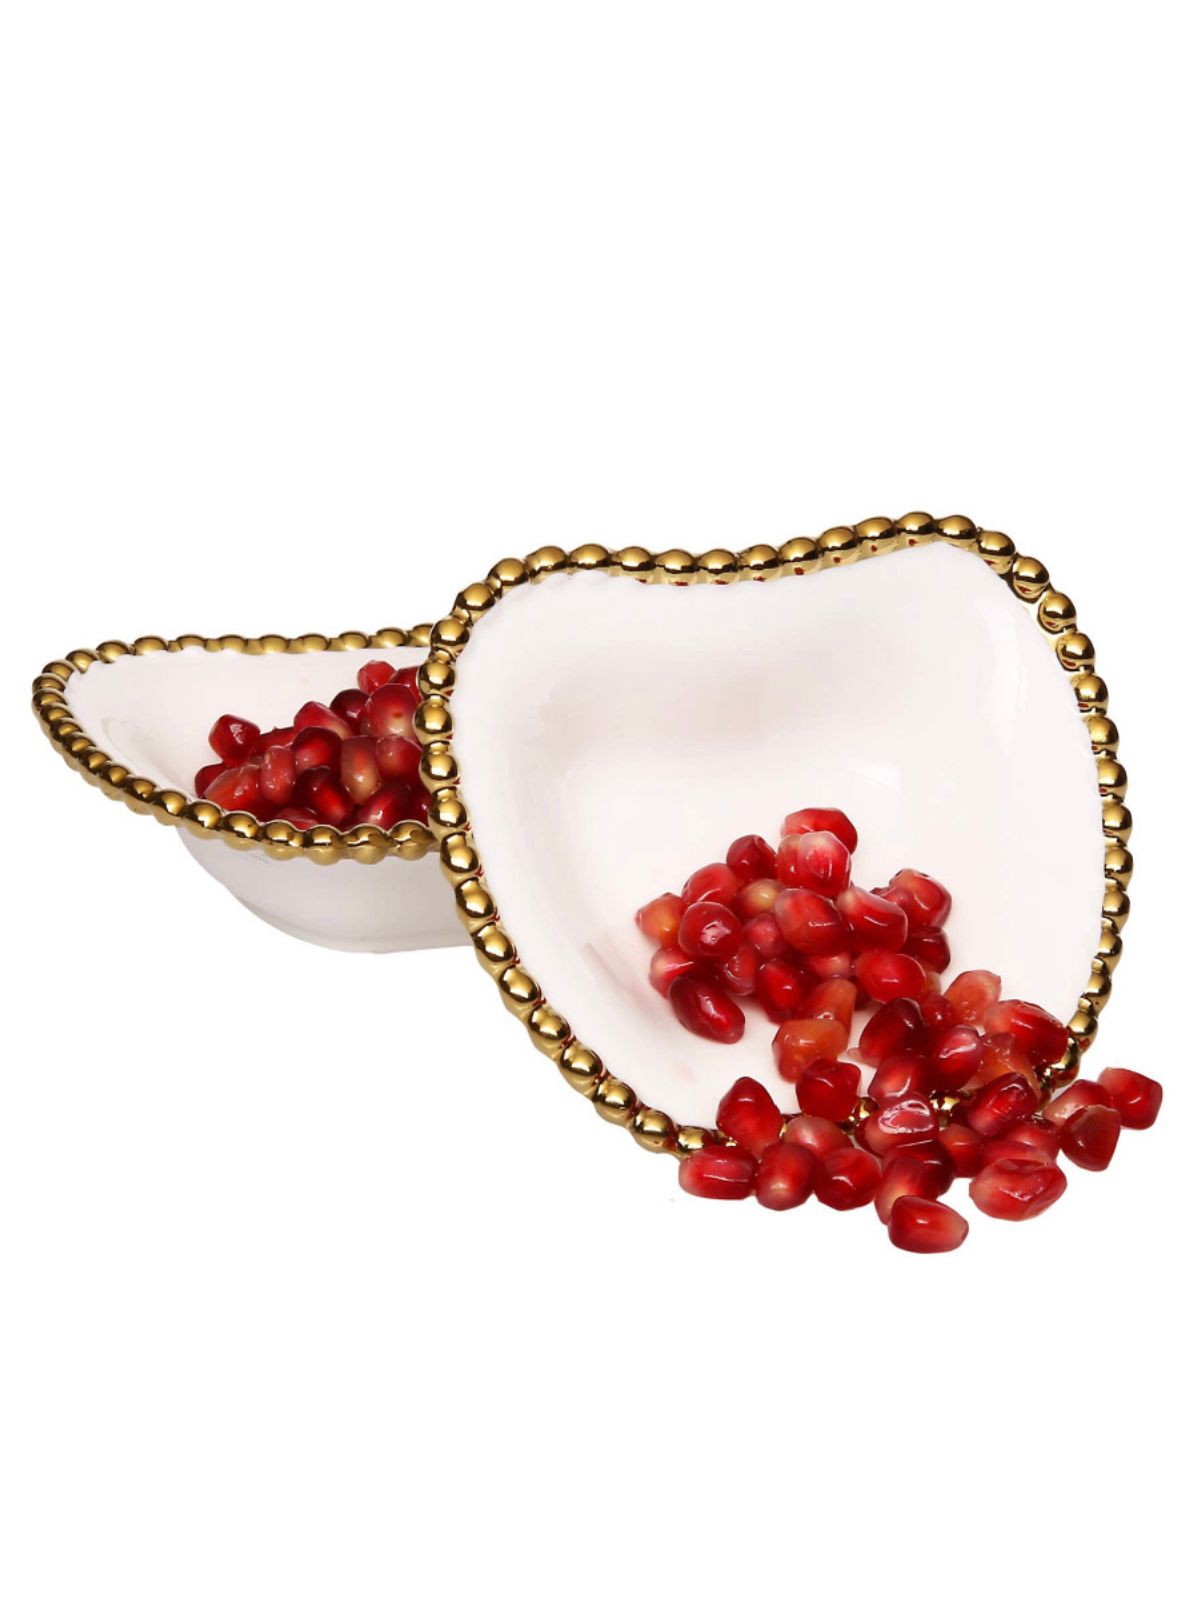 Mother Nature's designs are sweet and inviting. This apple shaped dish features a gold beaded edge on fine white porcelain material. Eco-chic and unique, these bowls are useful for fruit chunks, chocolates, and candy. 